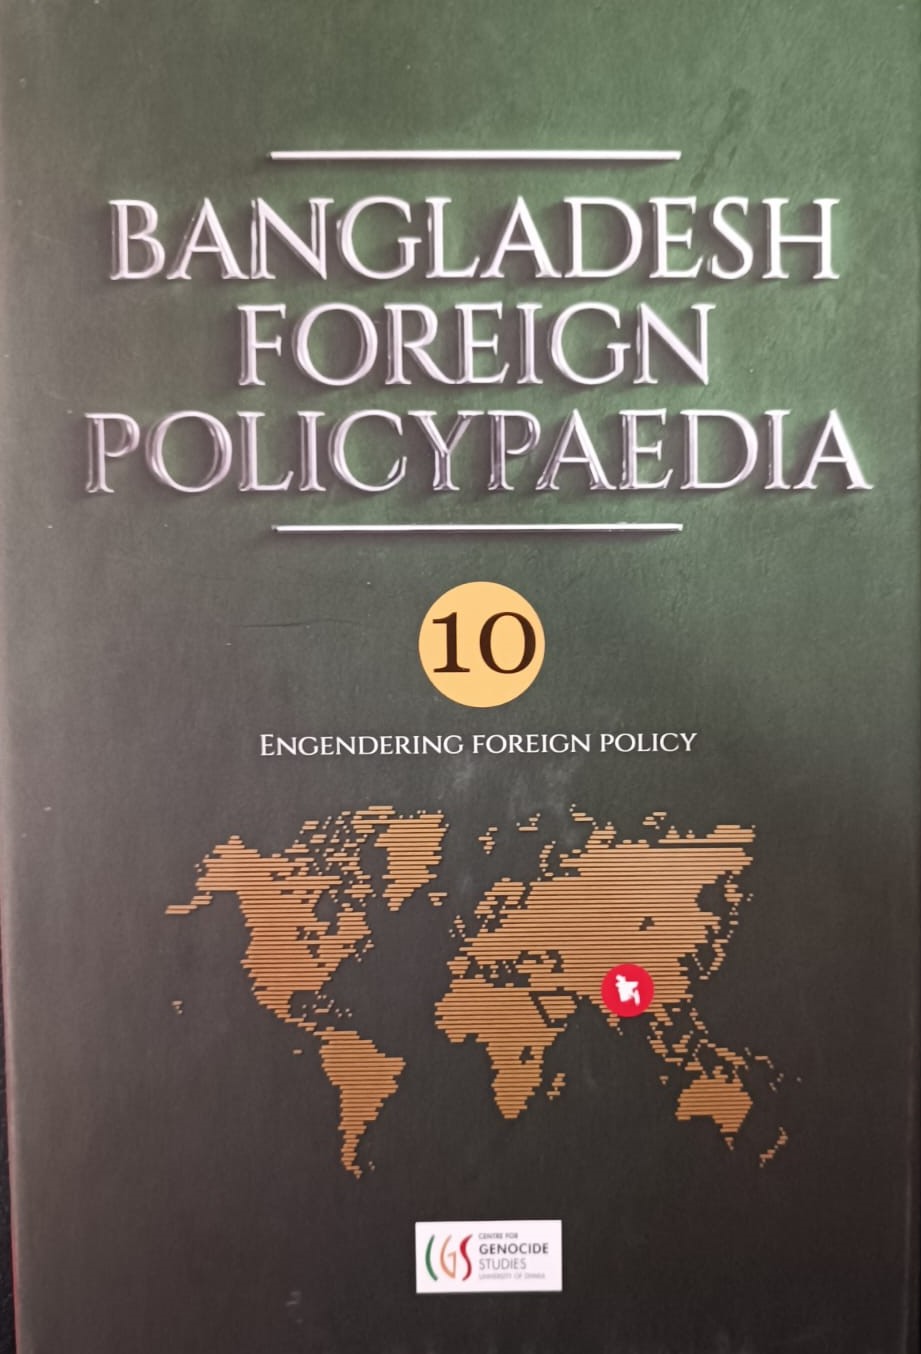 Bangladesh Foreign Policy Paedia: Engendering Foreign Policy